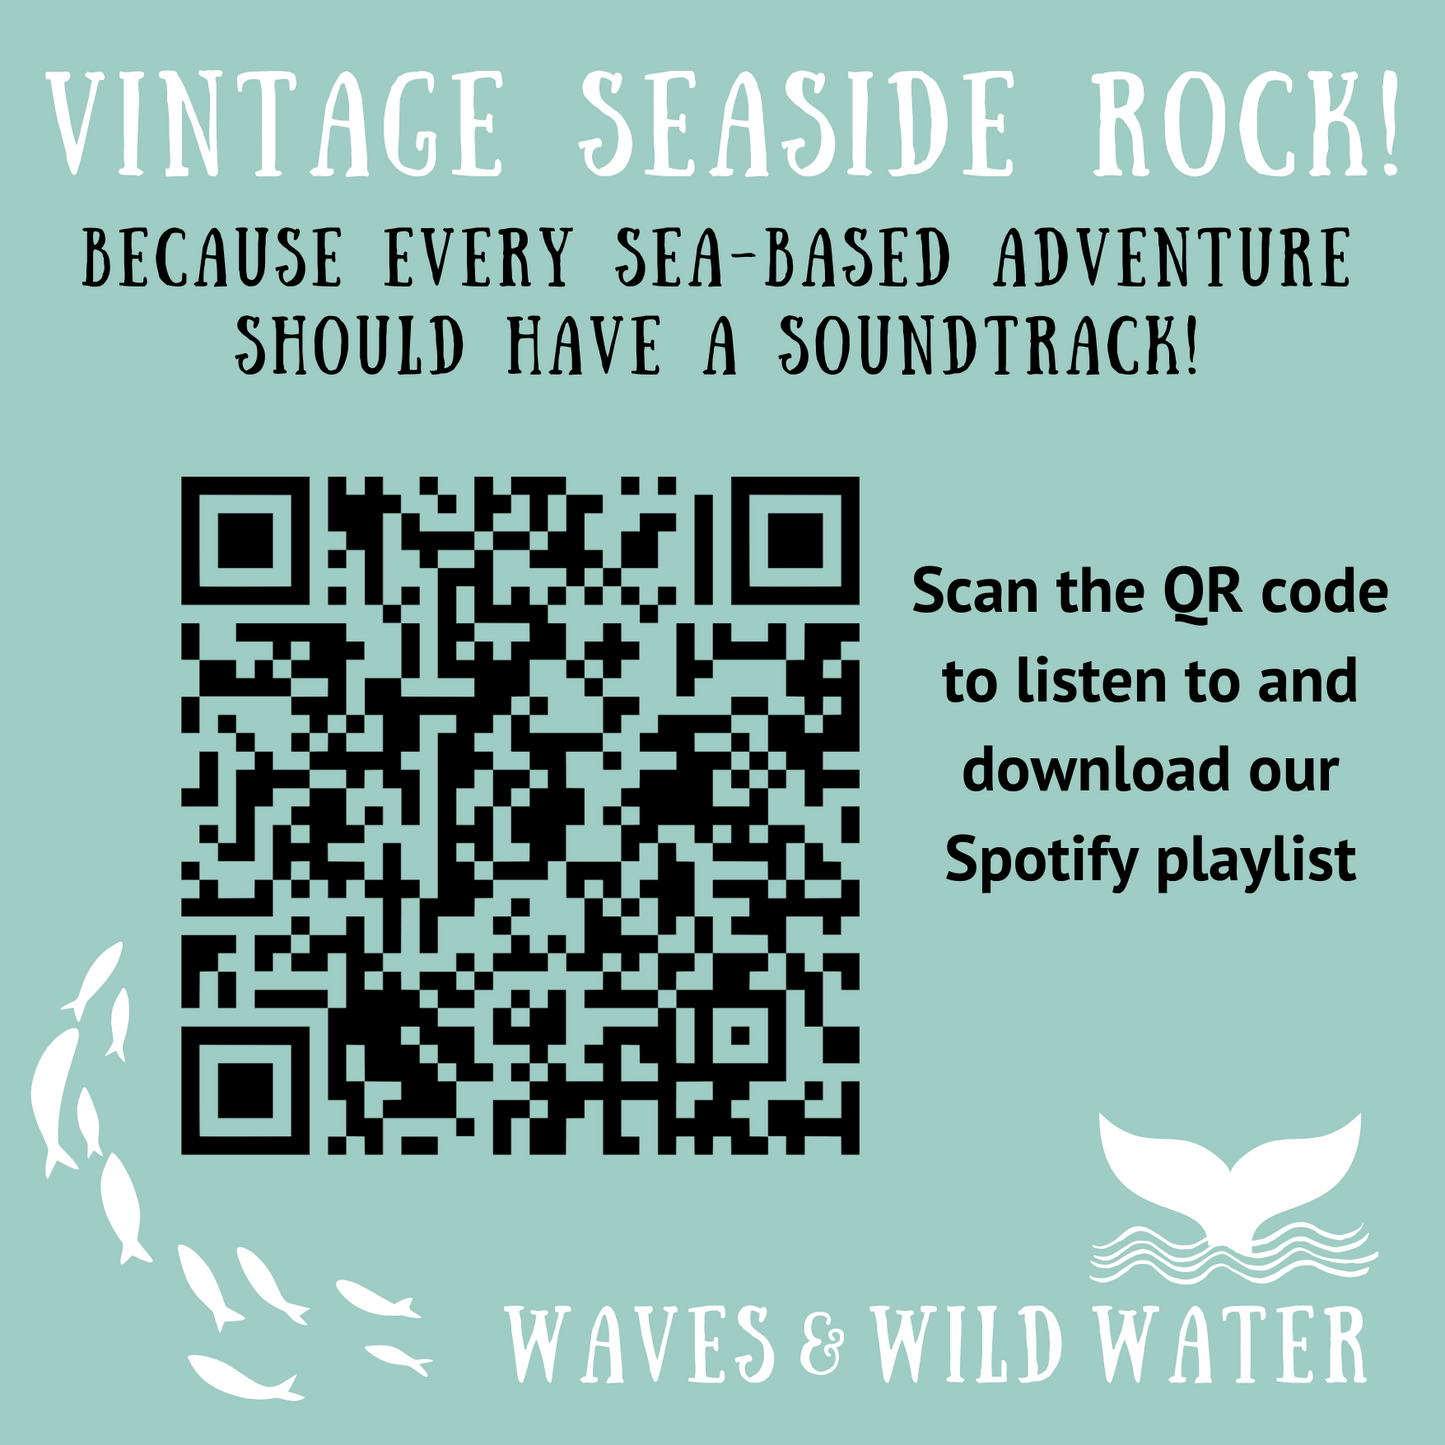 QR Code with a Spotify link